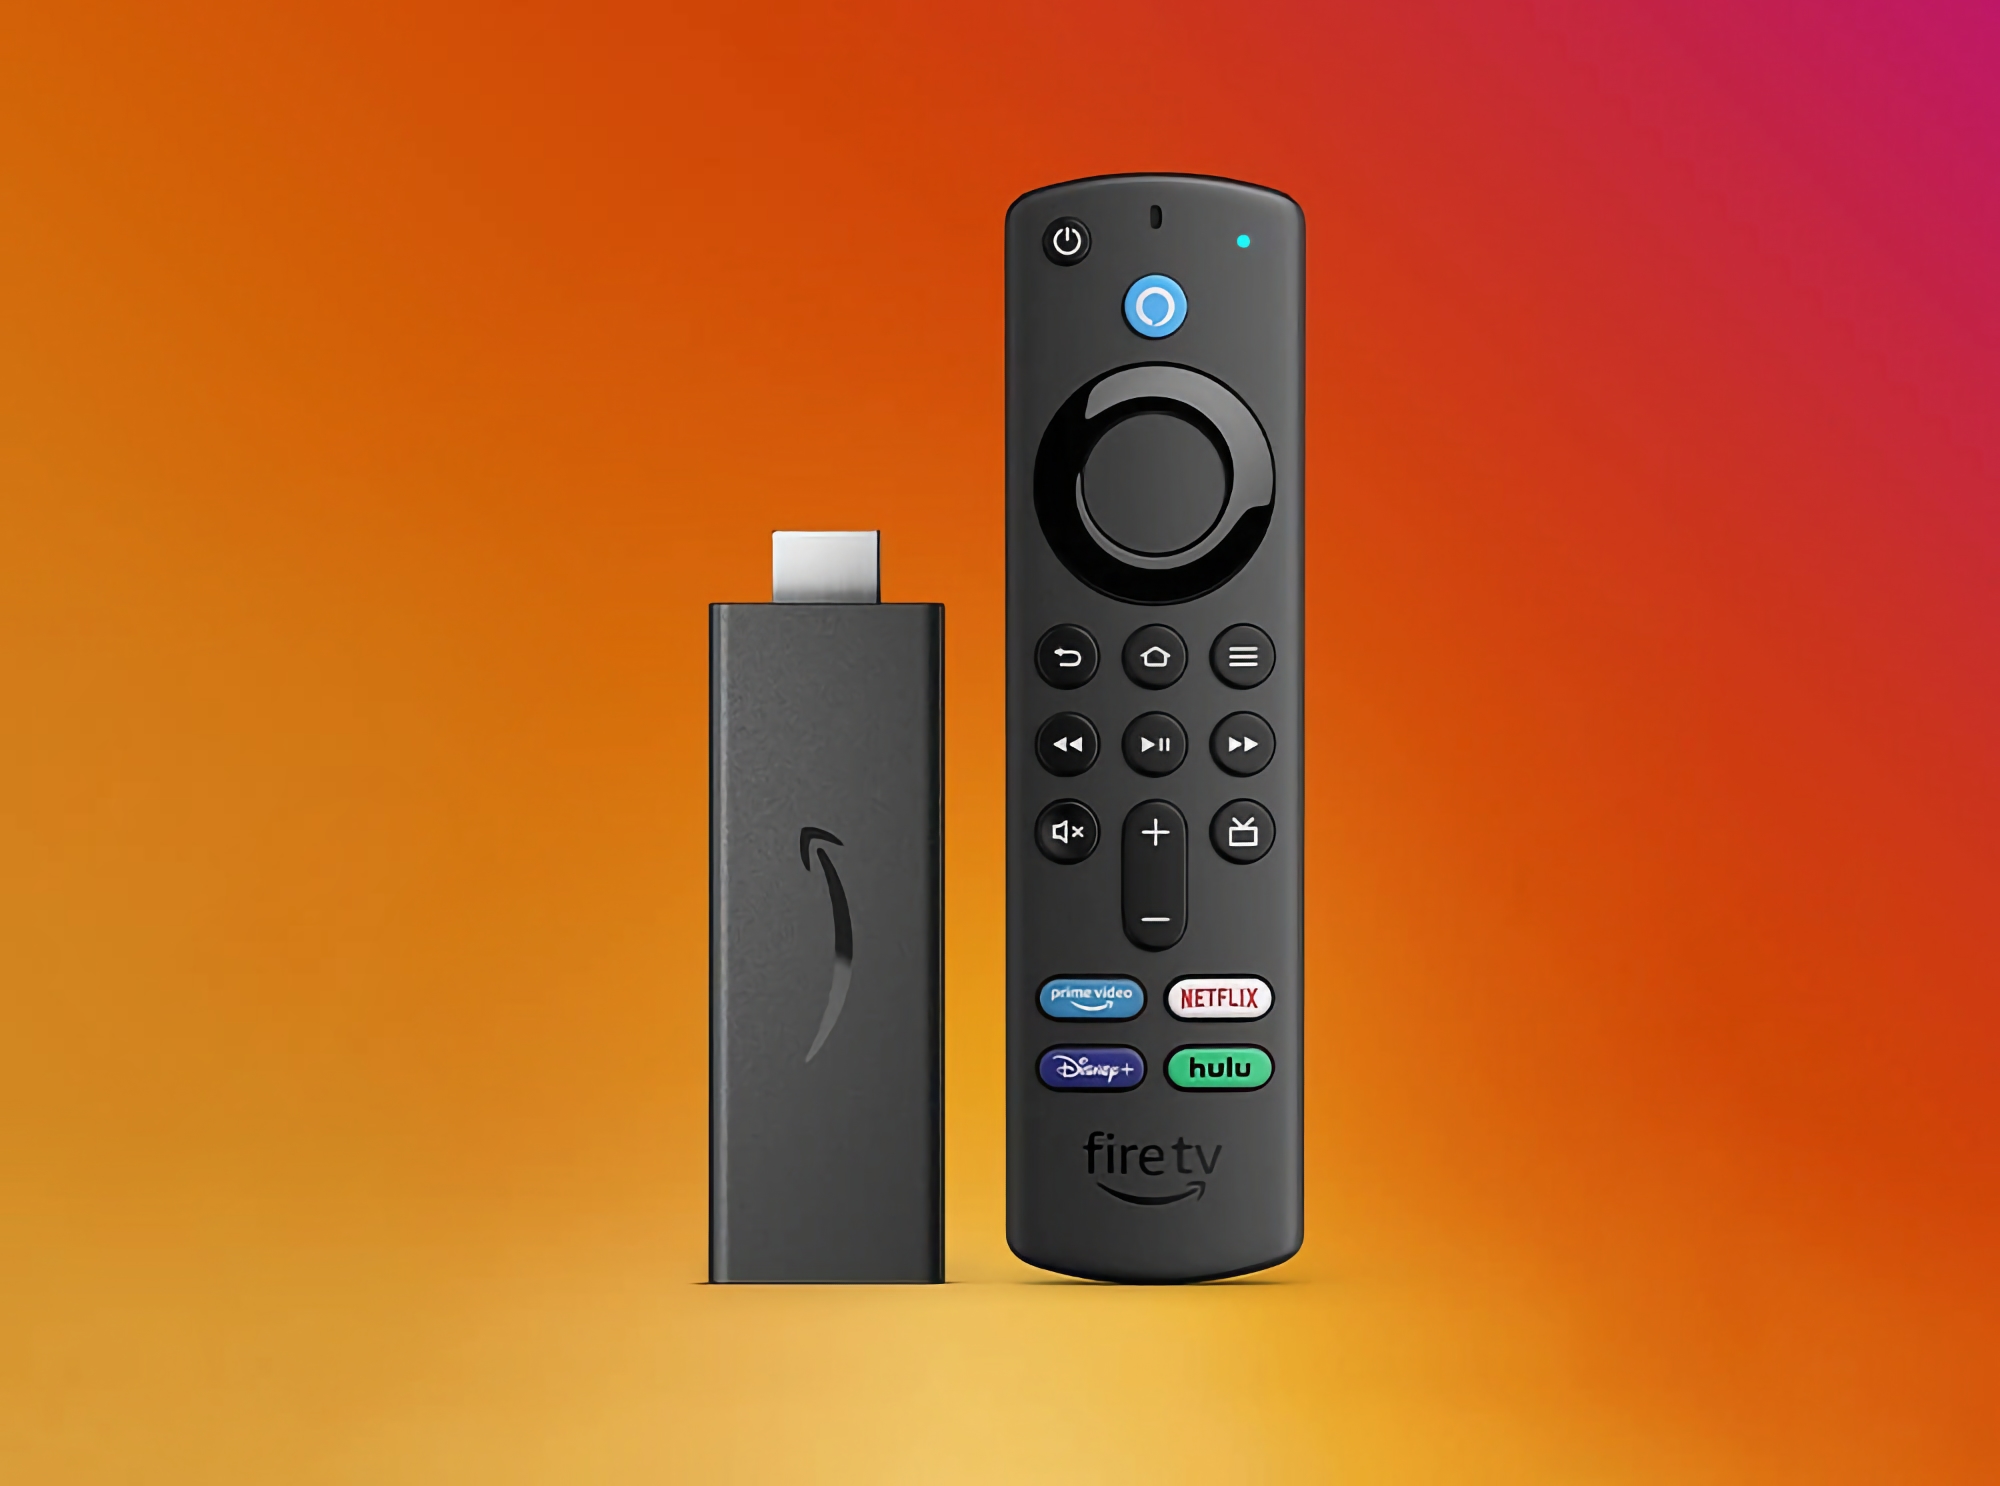 The Fire TV Stick Lite can be purchased on Amazon for $21 (27% off)